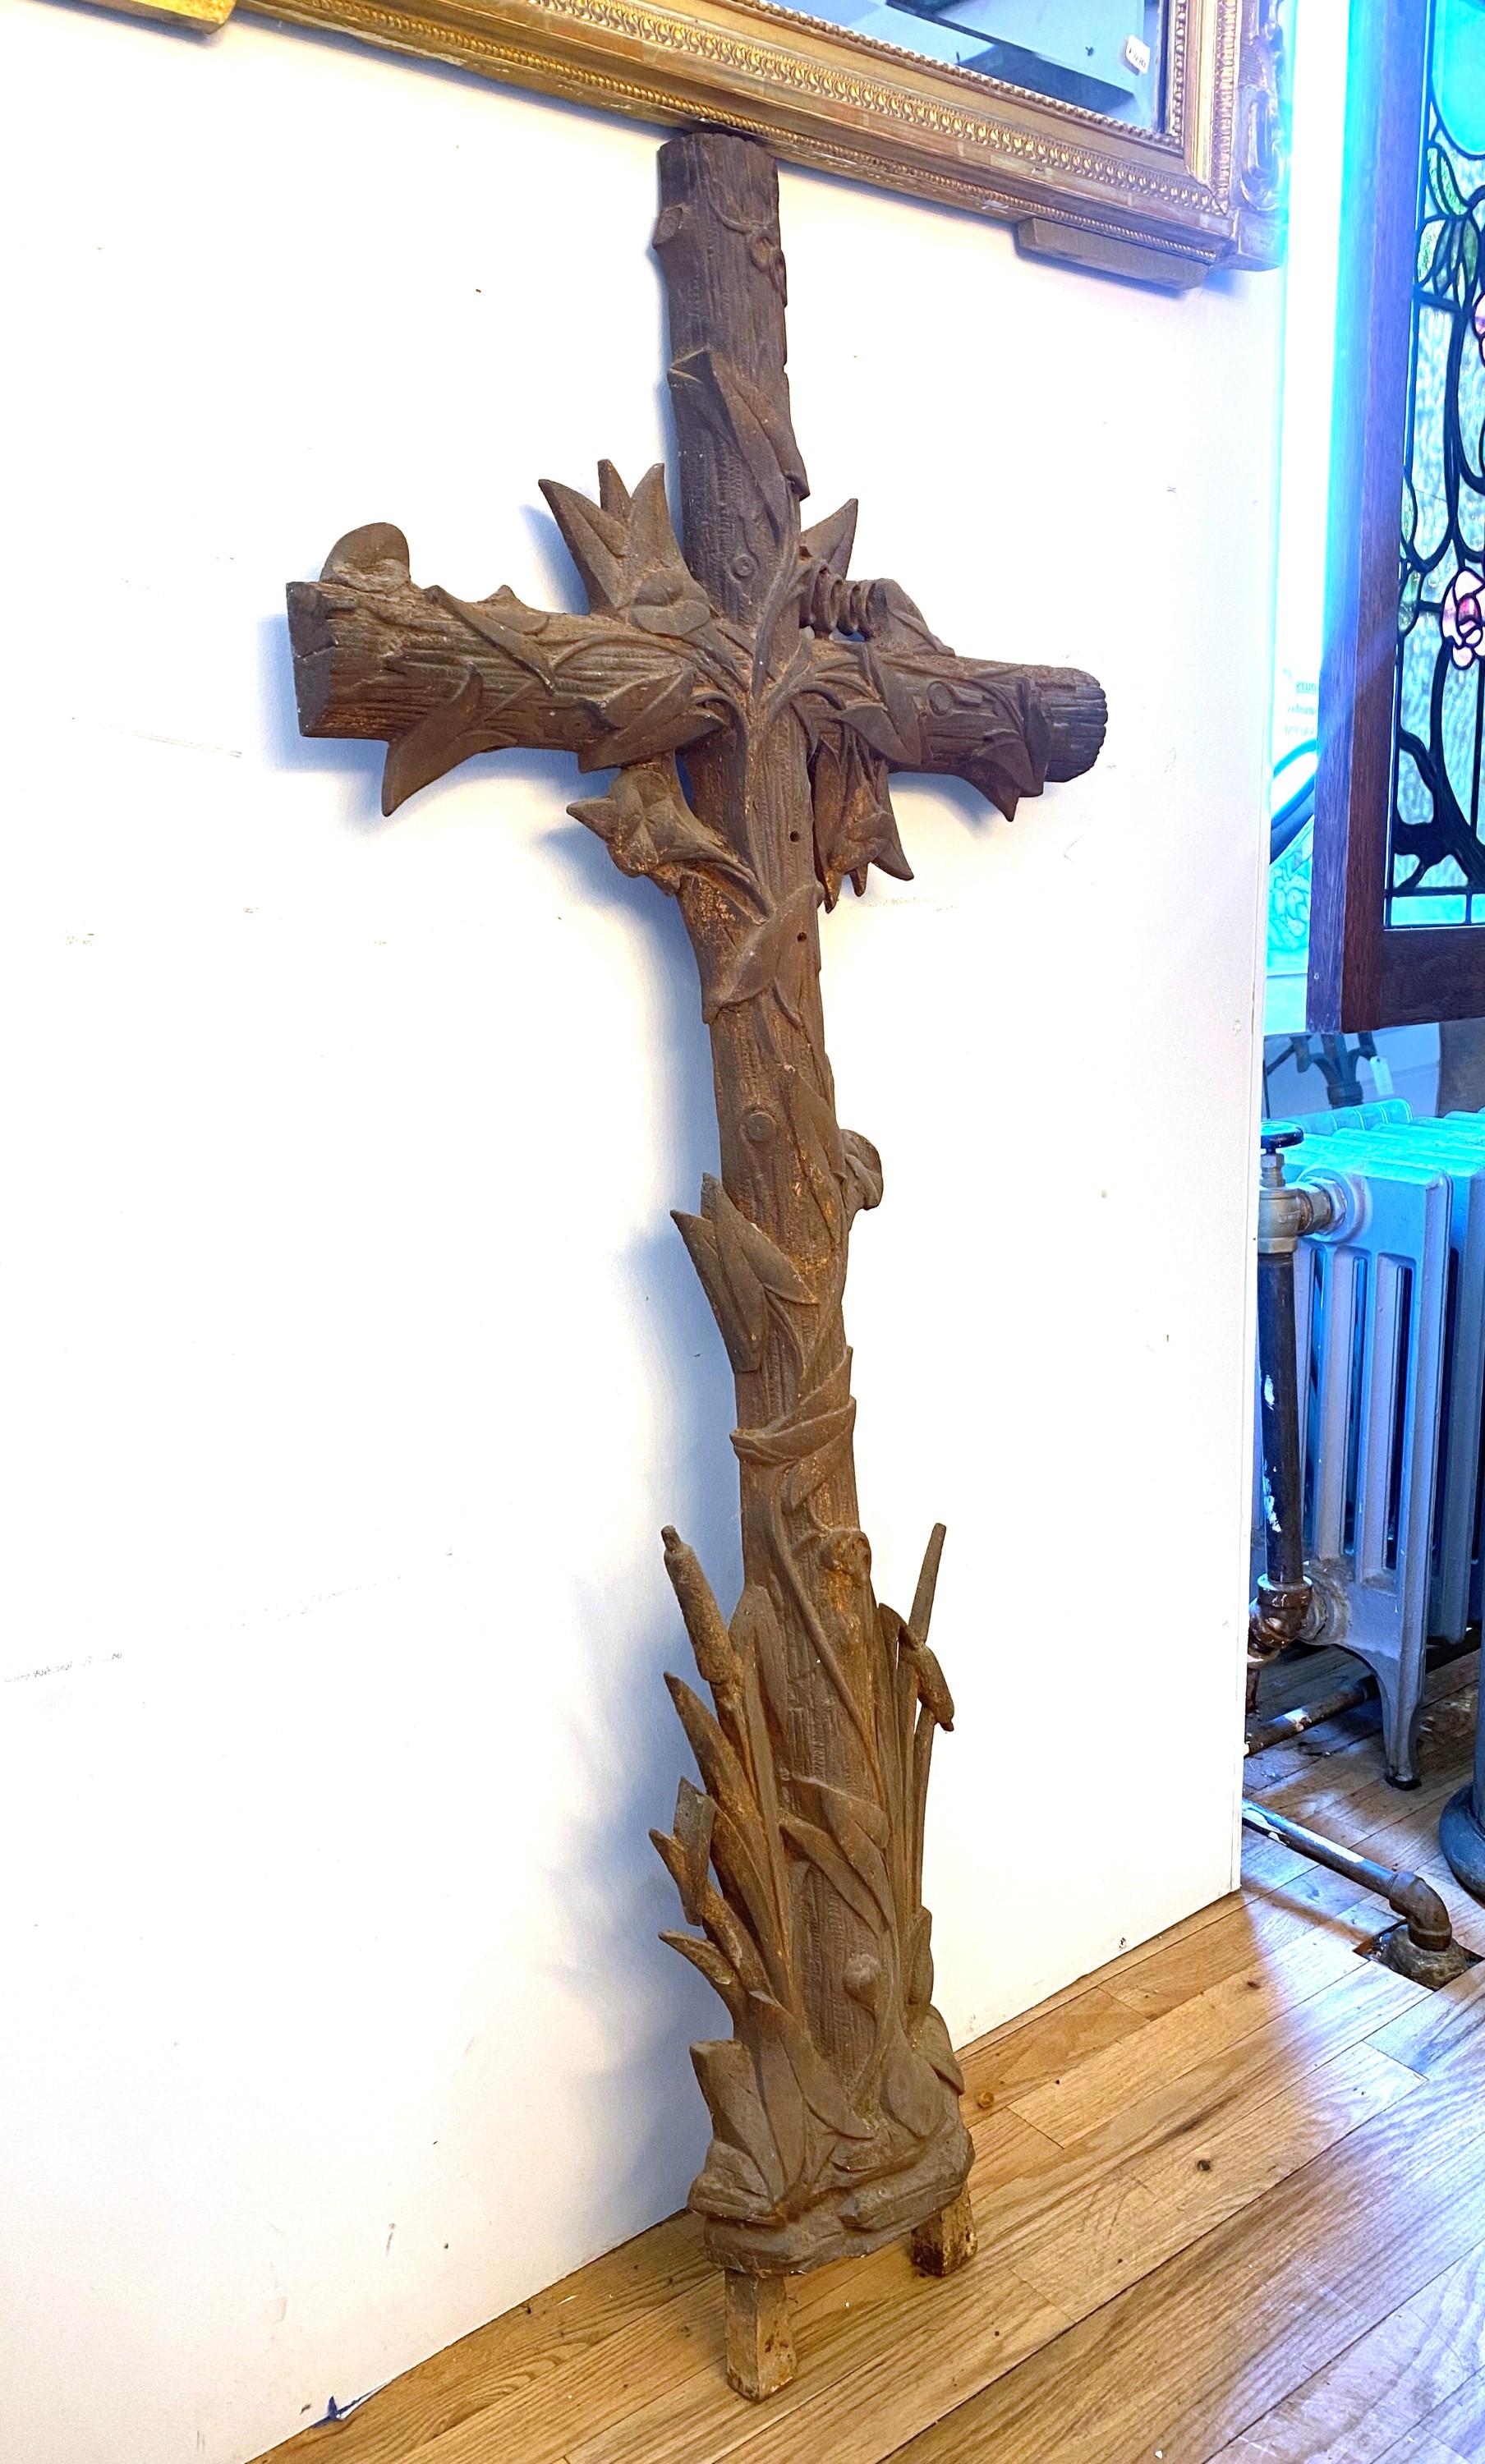 Antique European wall mounted cast iron cross featuring a wood design with floral flowers and leaves sprouting up and around the cross. Mounting holes for mounting to a wall. Please note, this item is located in one of our NYC locations.